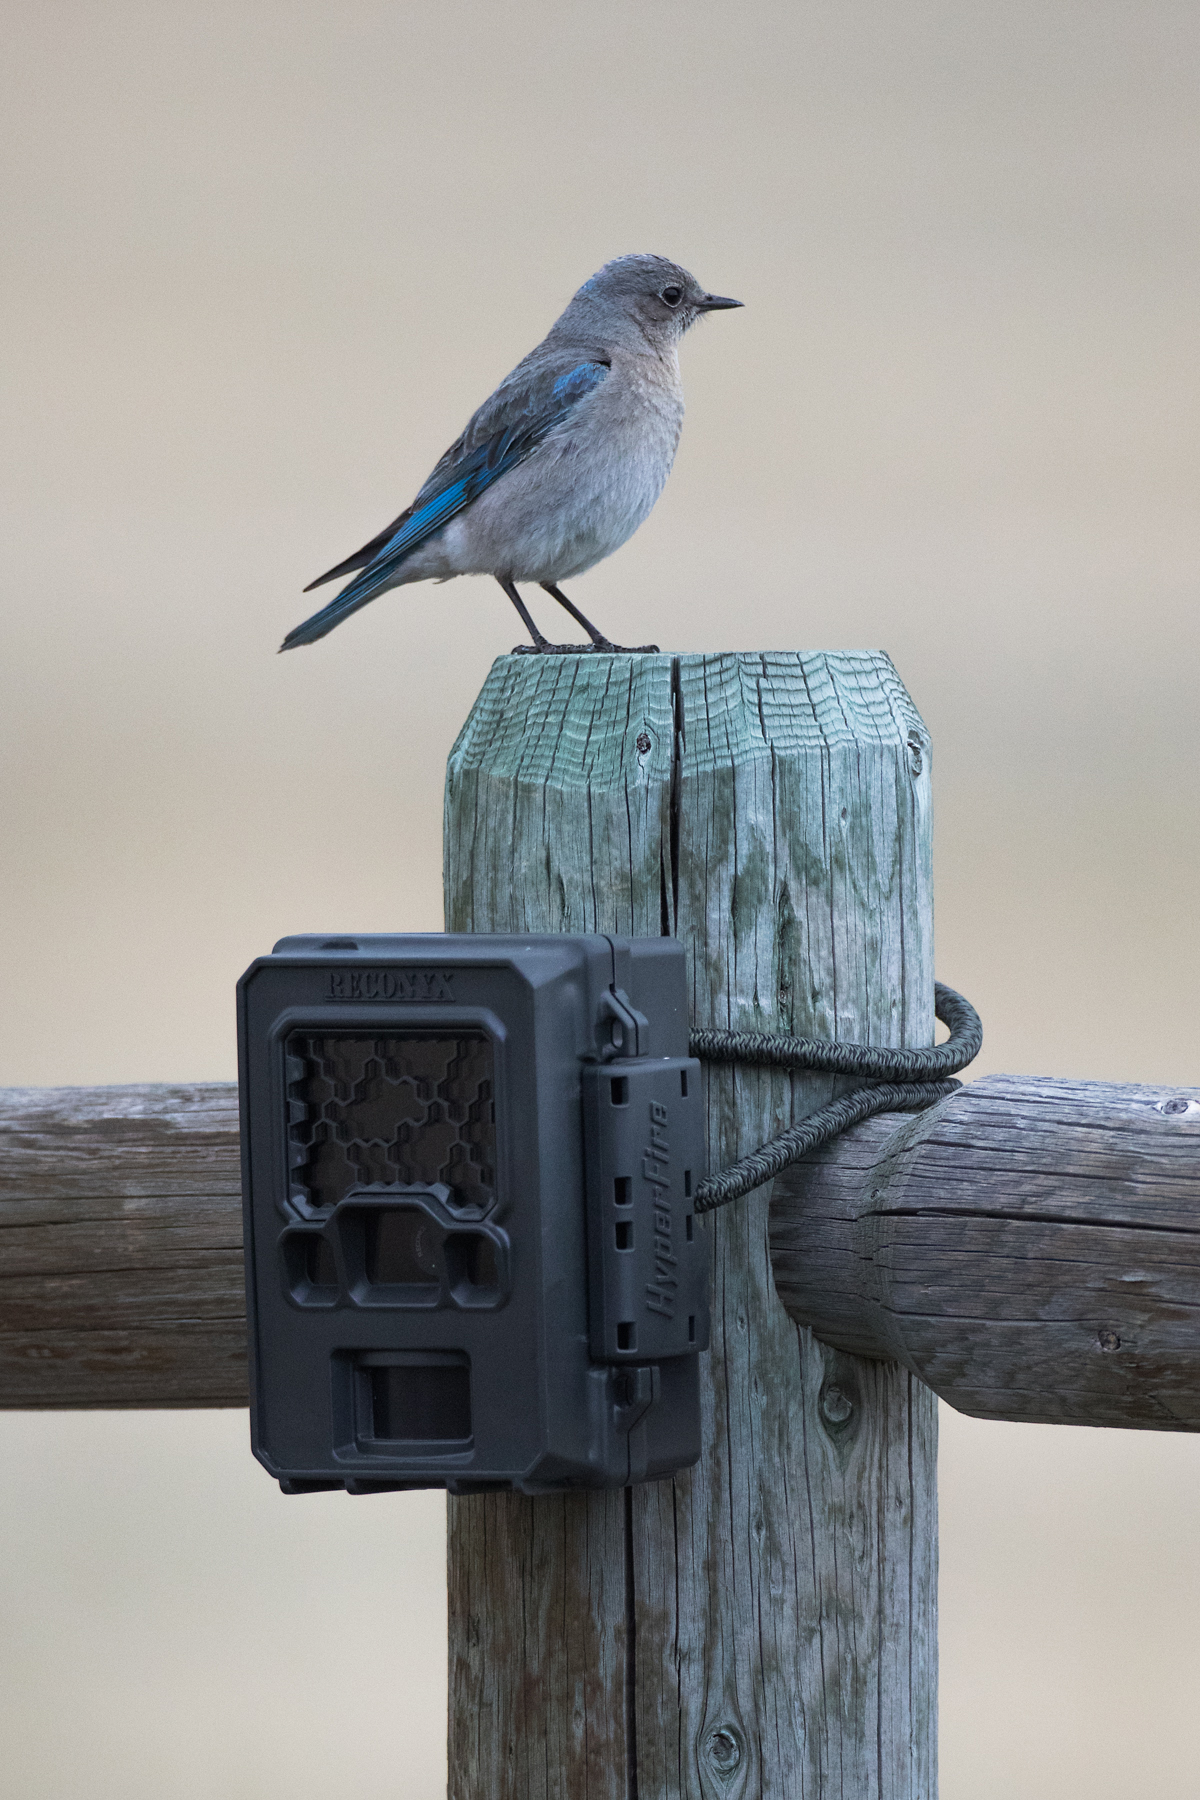 Bluebird shown with Reconyx trailcam, Red Lodge, Montana.  Click for next photo.